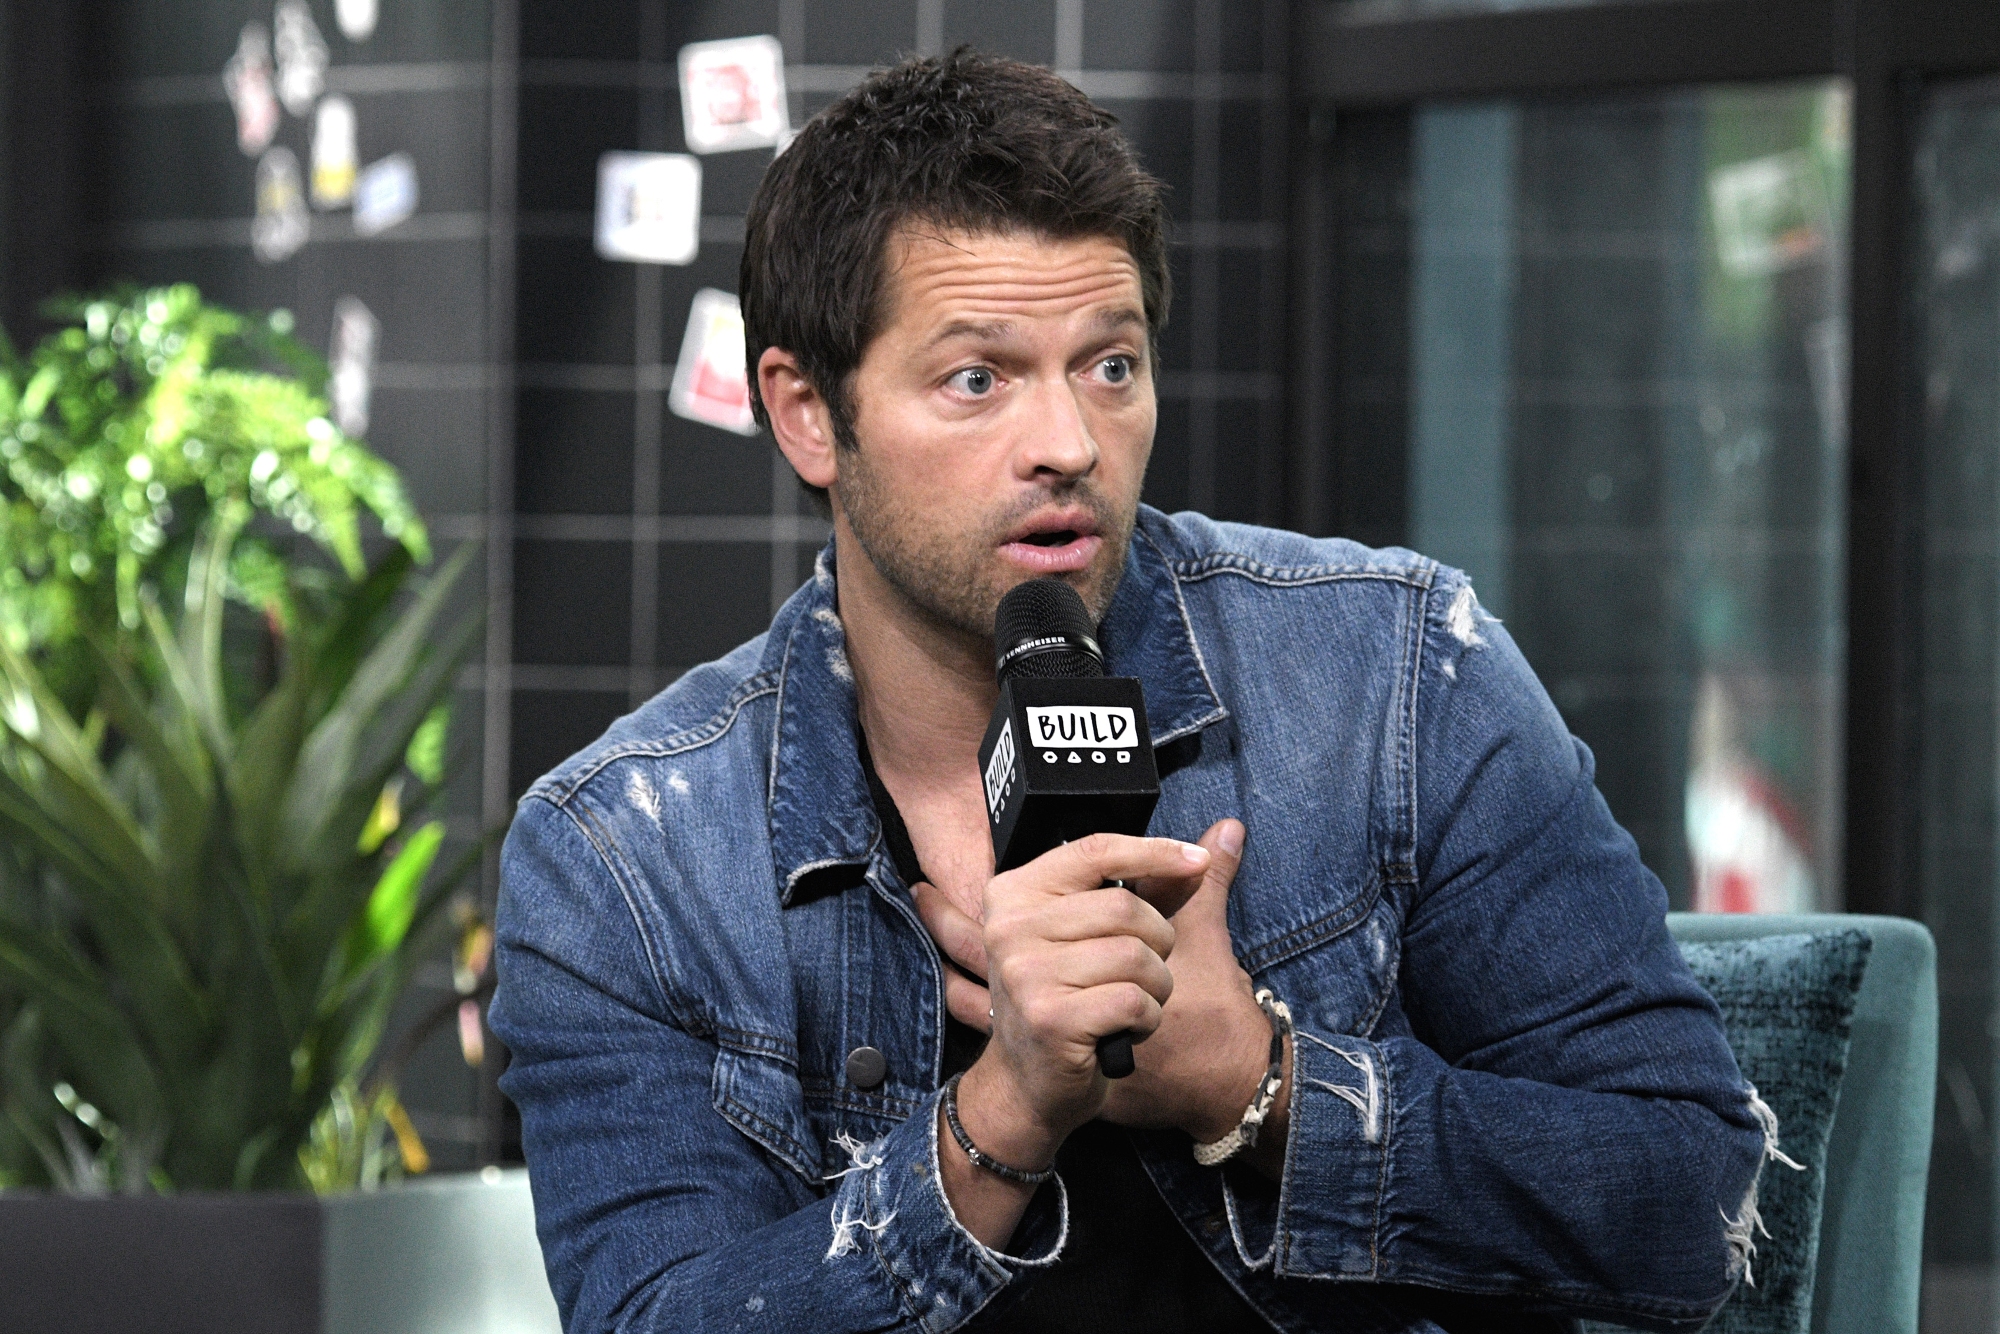 ‘Supernatural’ Star Misha Collins Felt ‘Sick to My Stomach’ for Mistakenly Coming Out as Bisexual